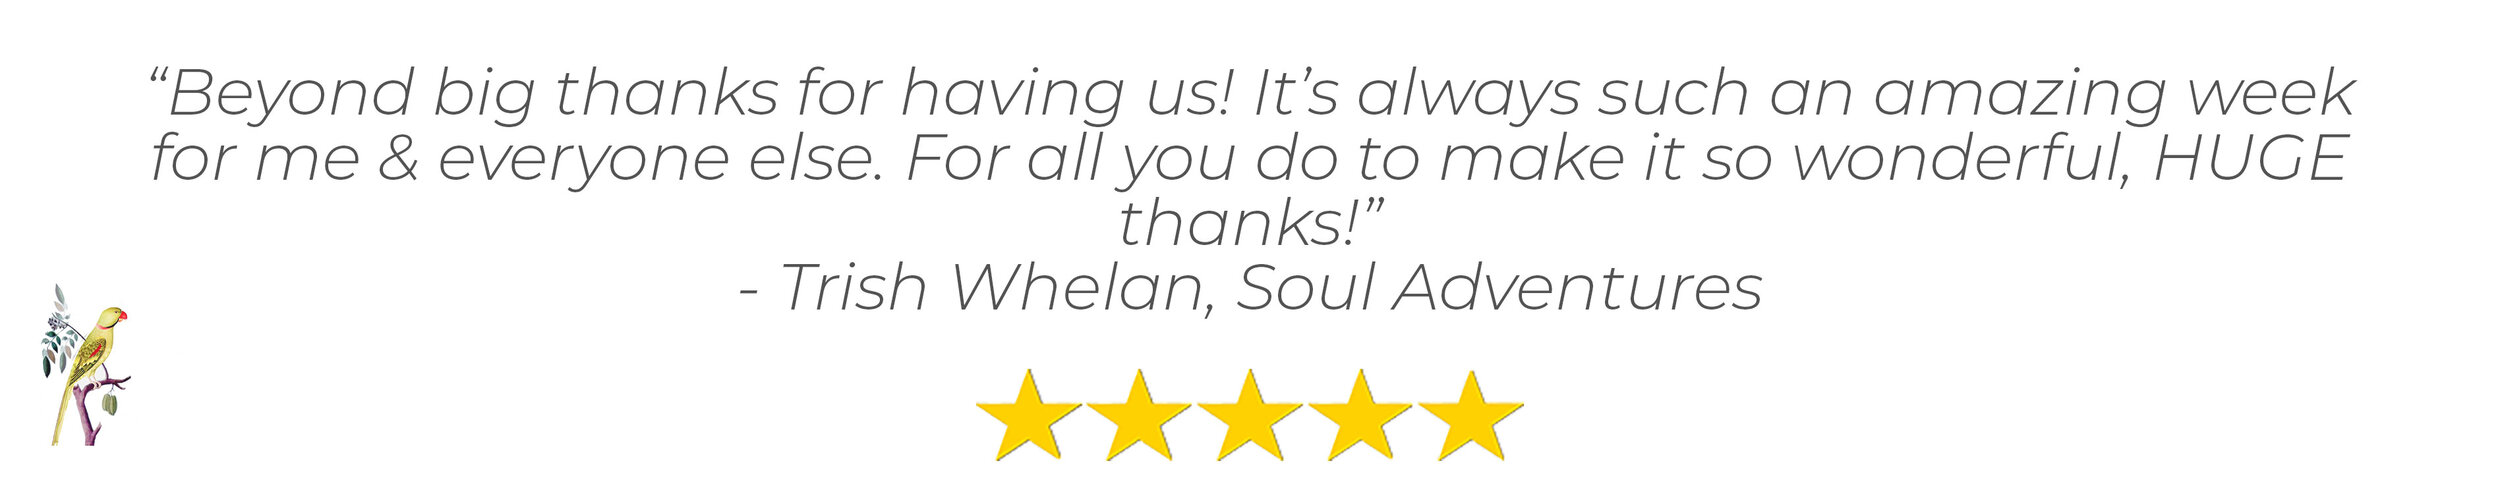 A five star review for Lua Cheia from yoga retreat leader Trish